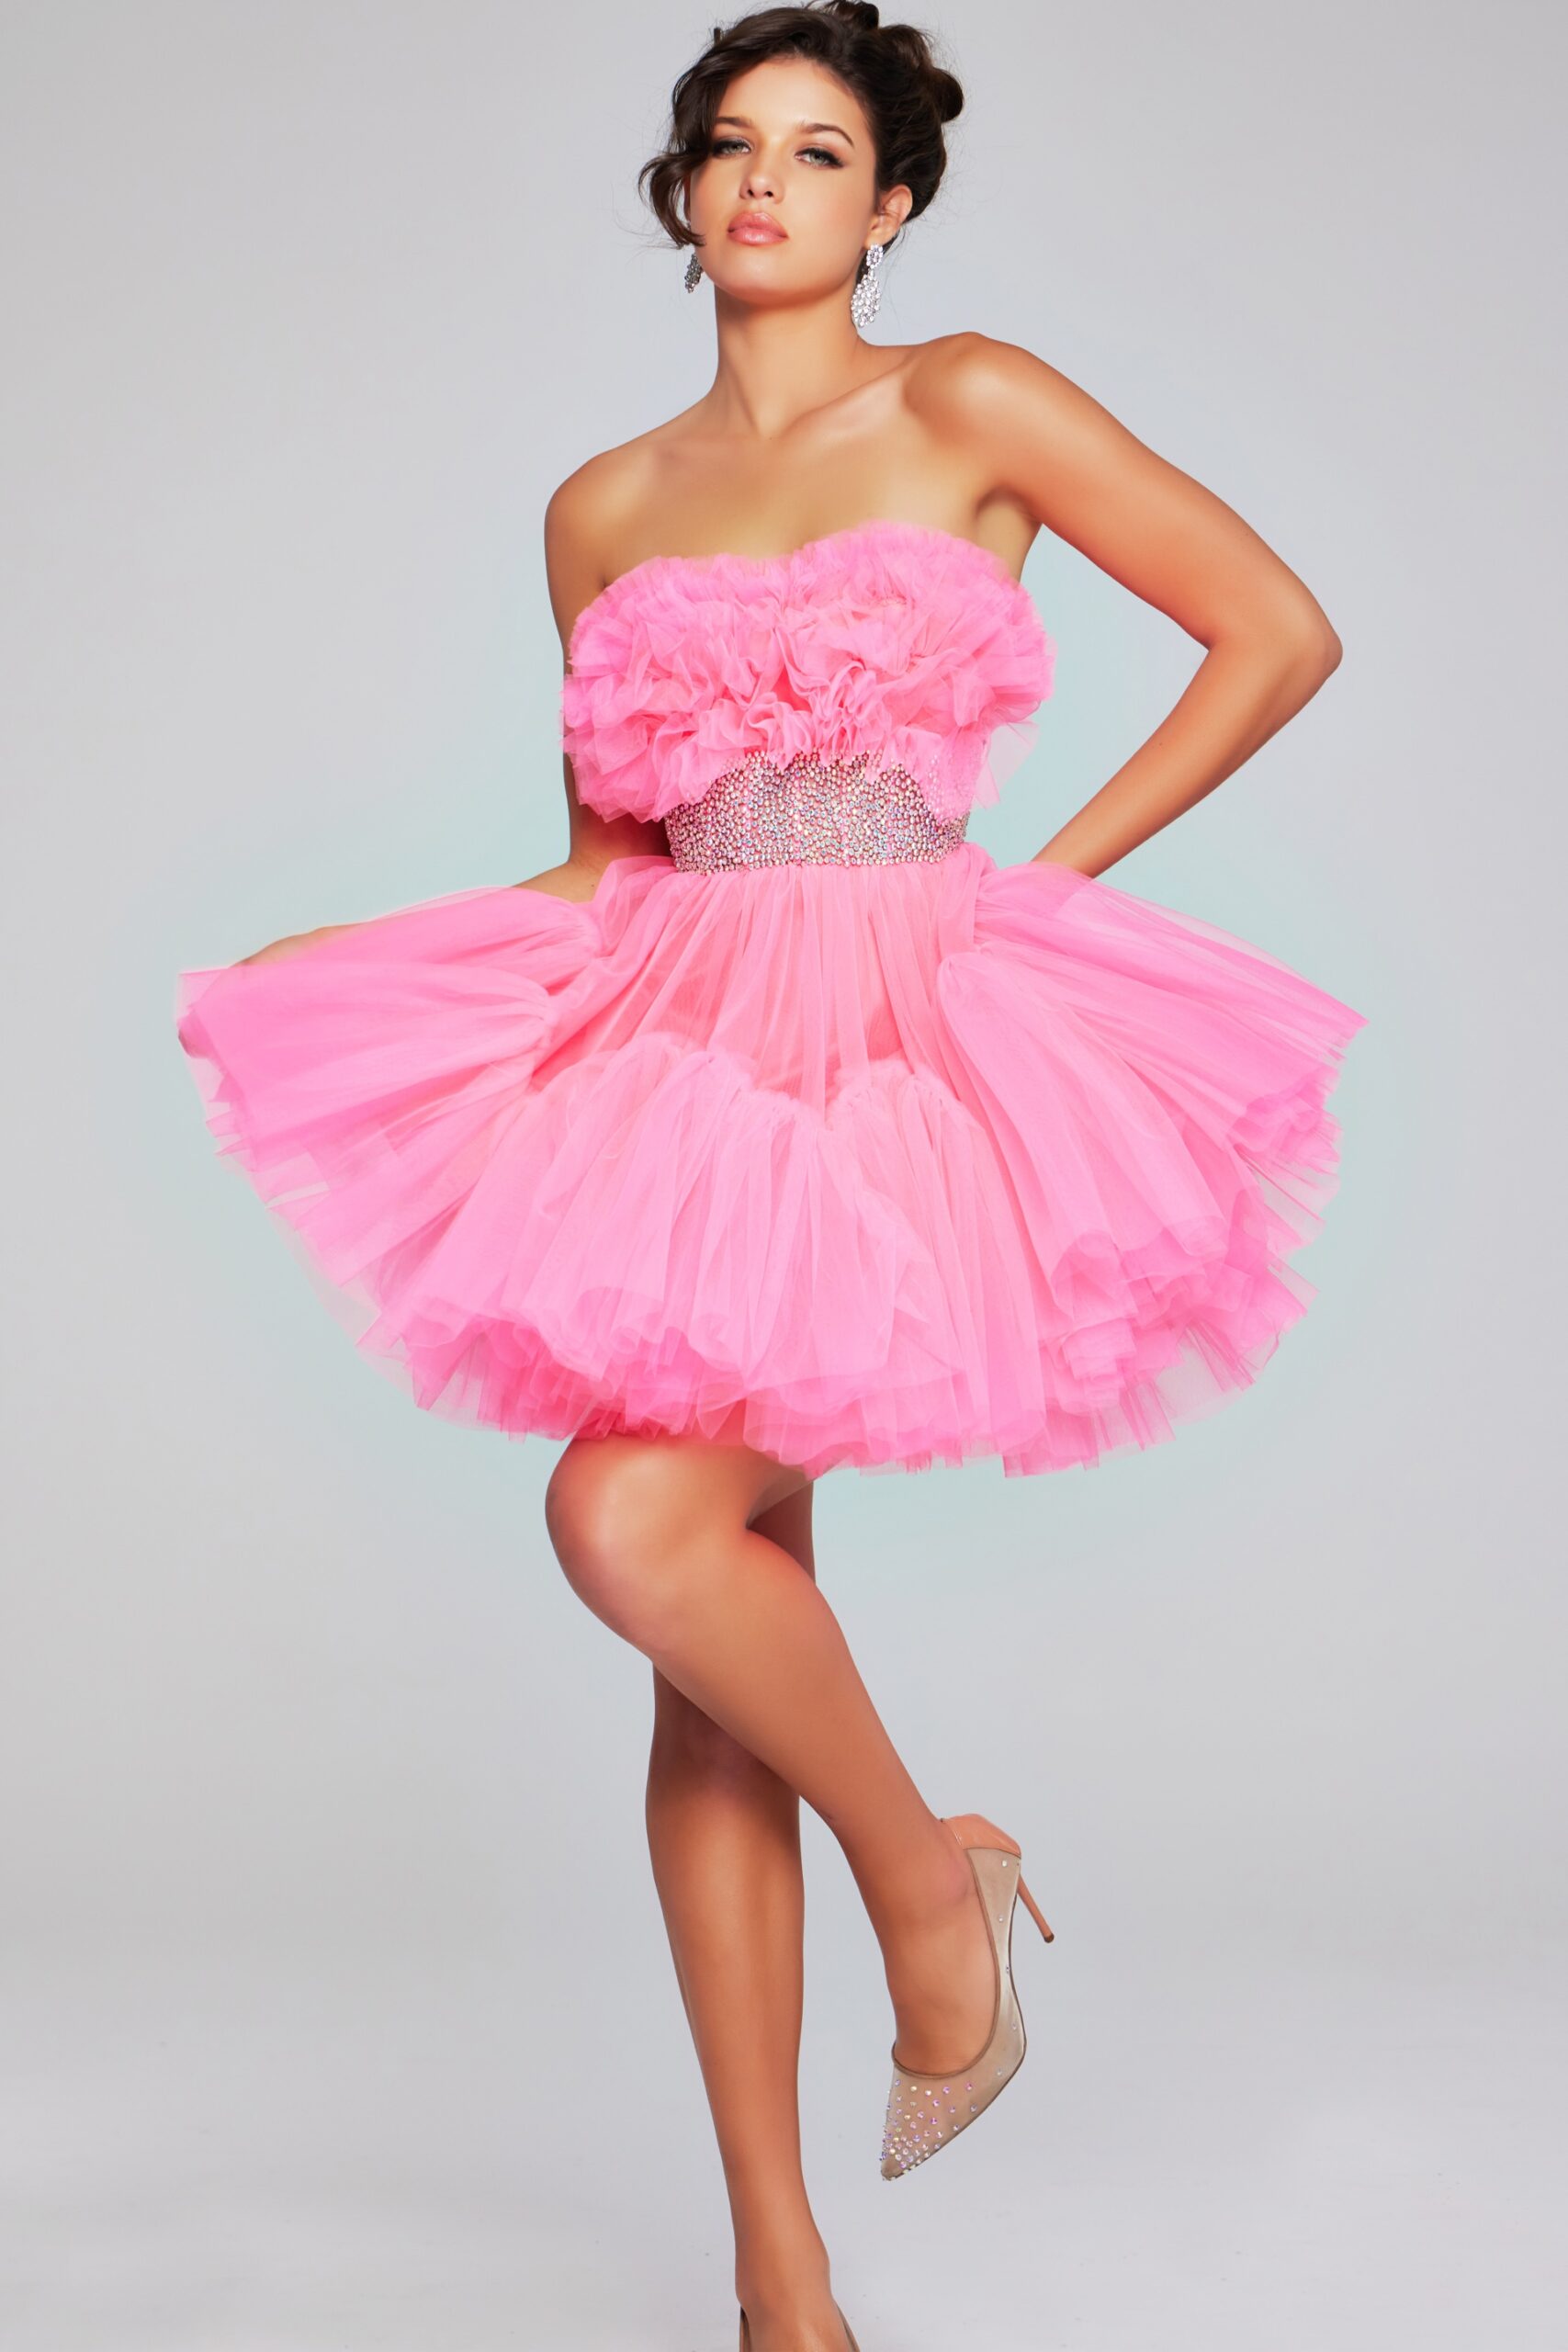 Strapless Pink Fit and Flare Short Dress 40186